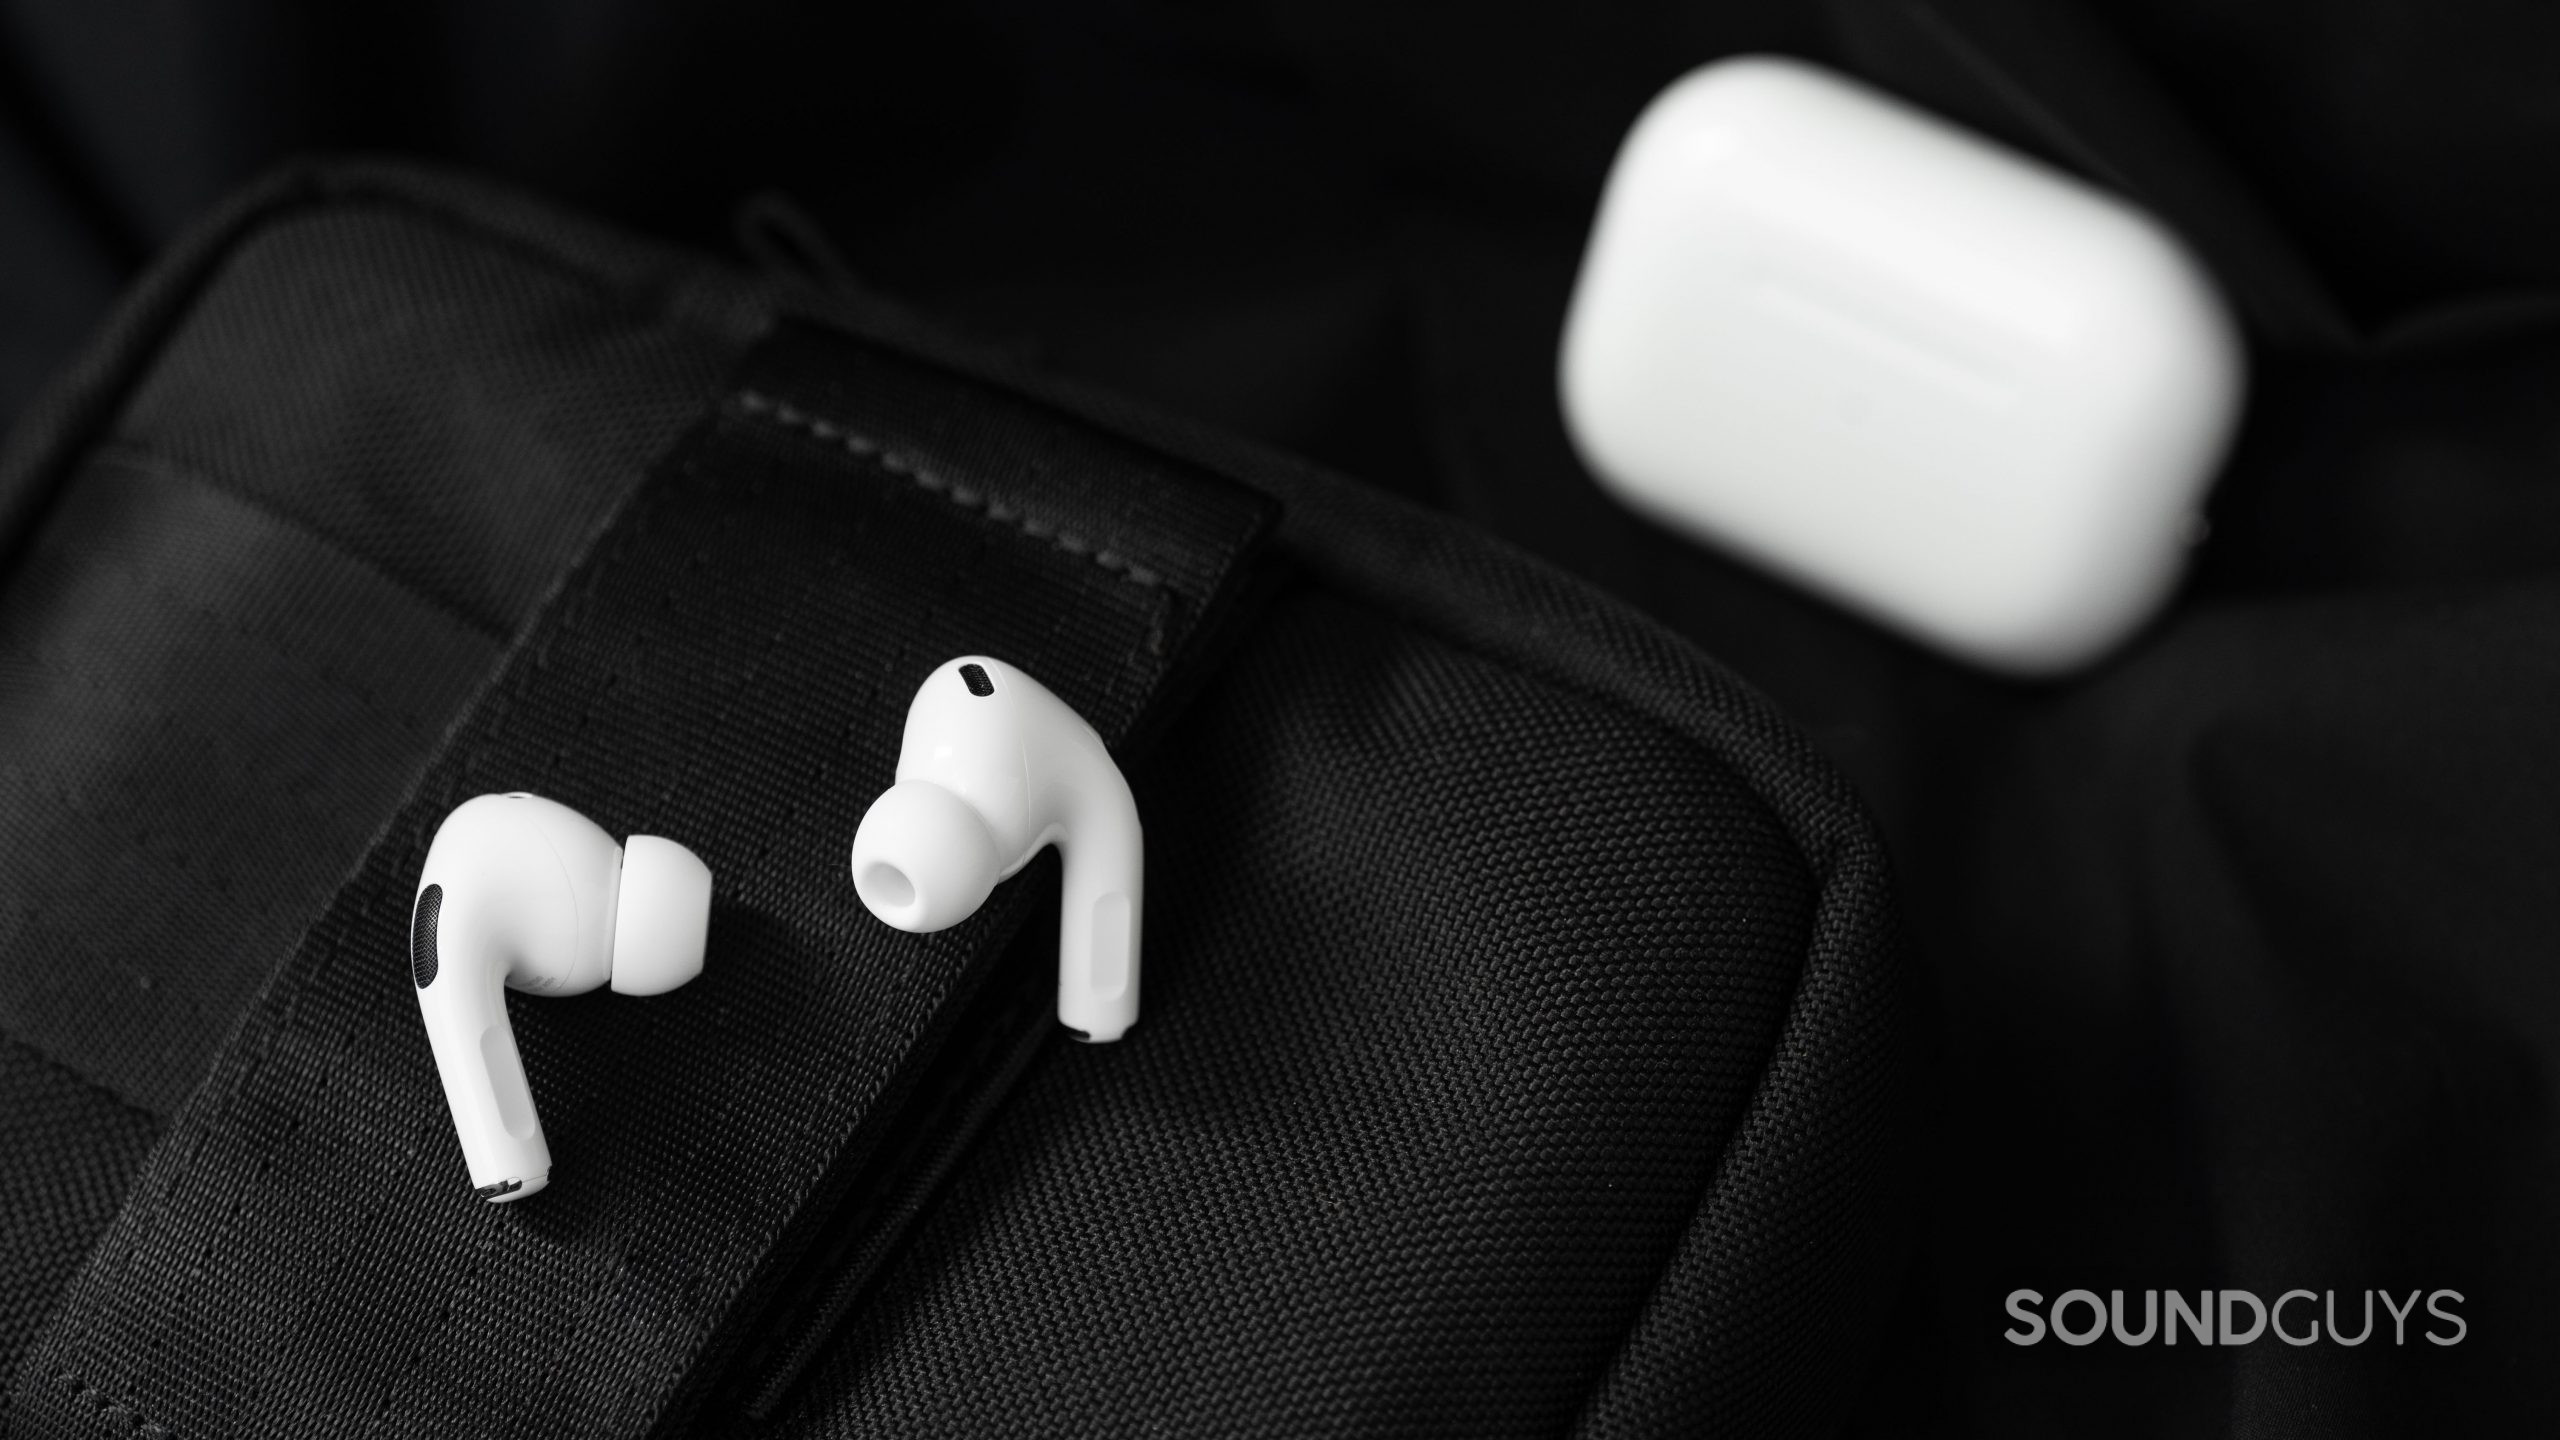 The Apple AirPods Pro (2nd generation) earbuds rest on a black surface with the case in the background.